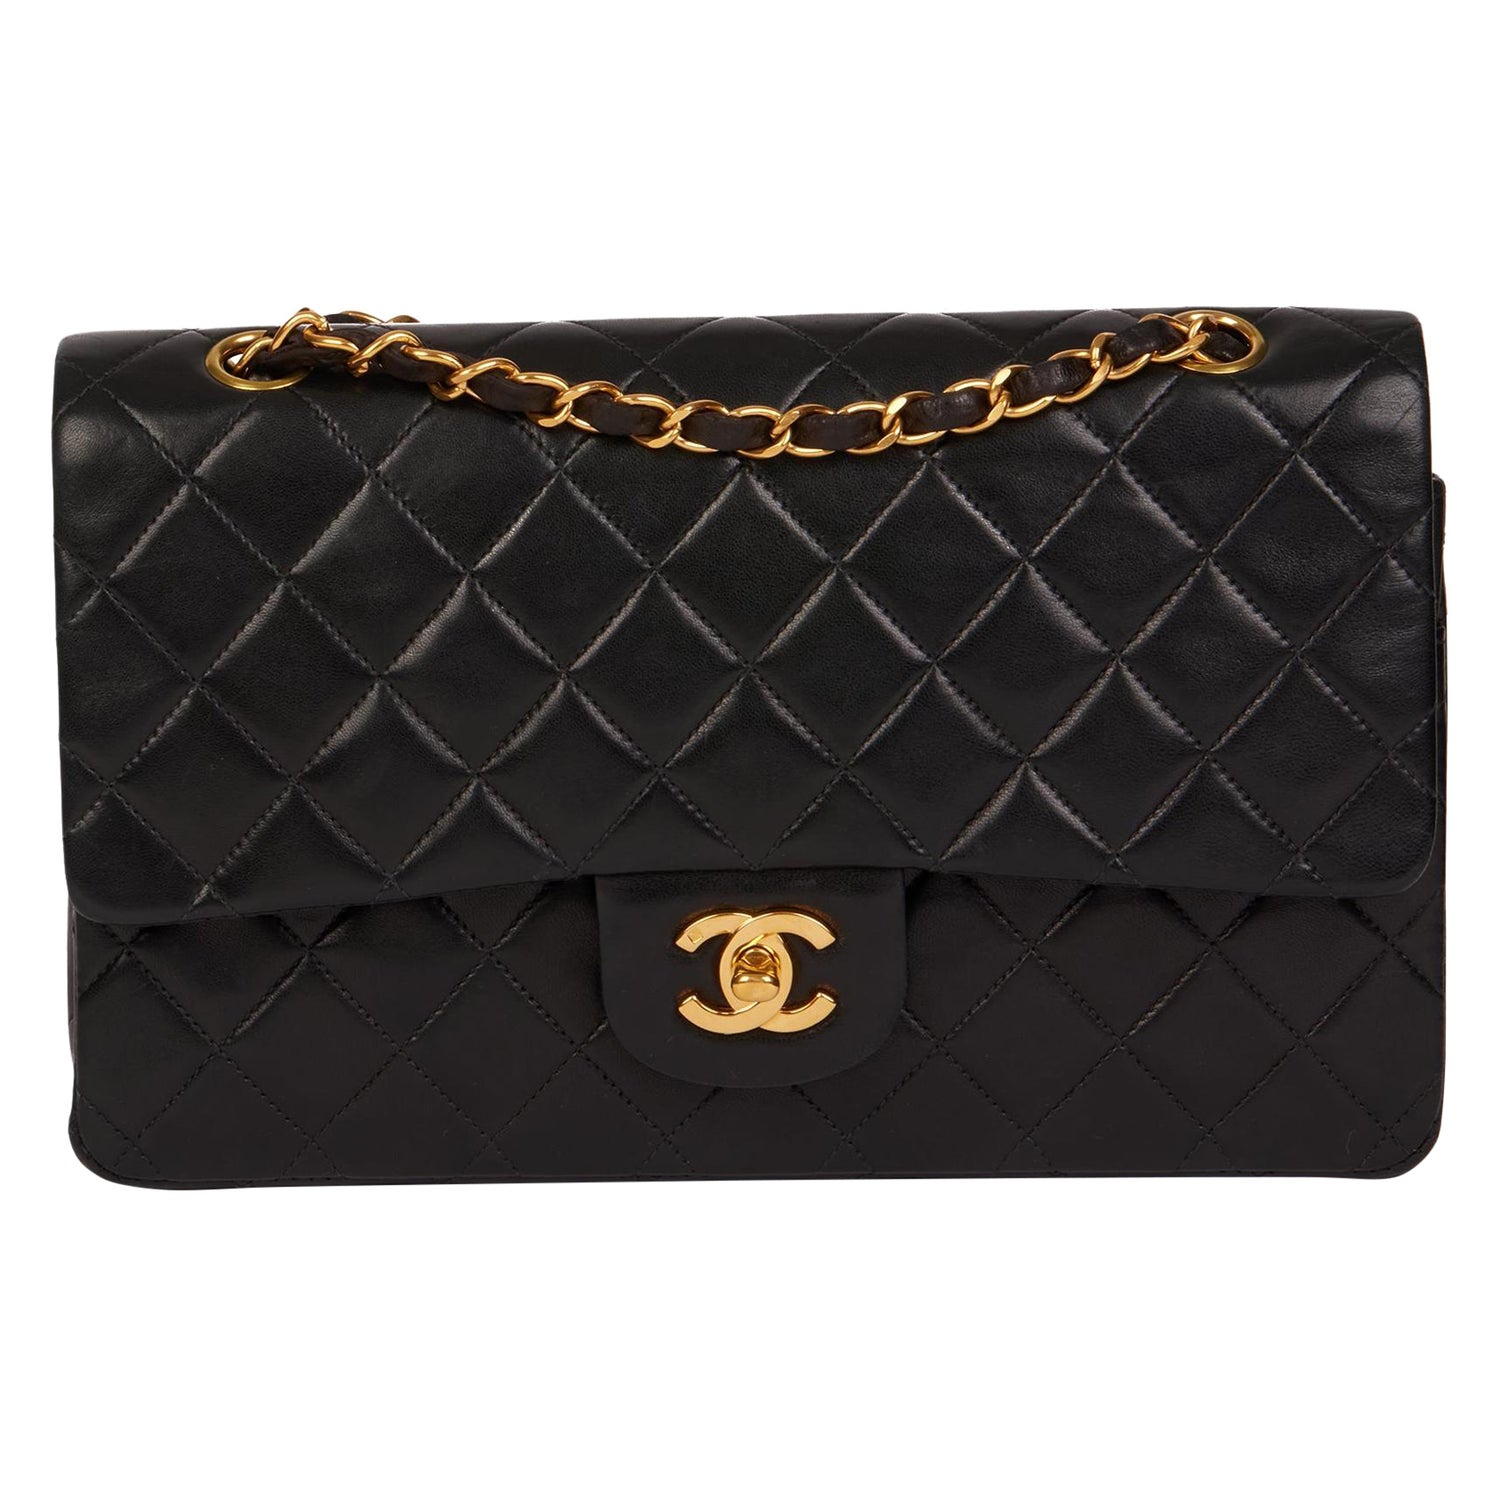 black chanel classic double flap small